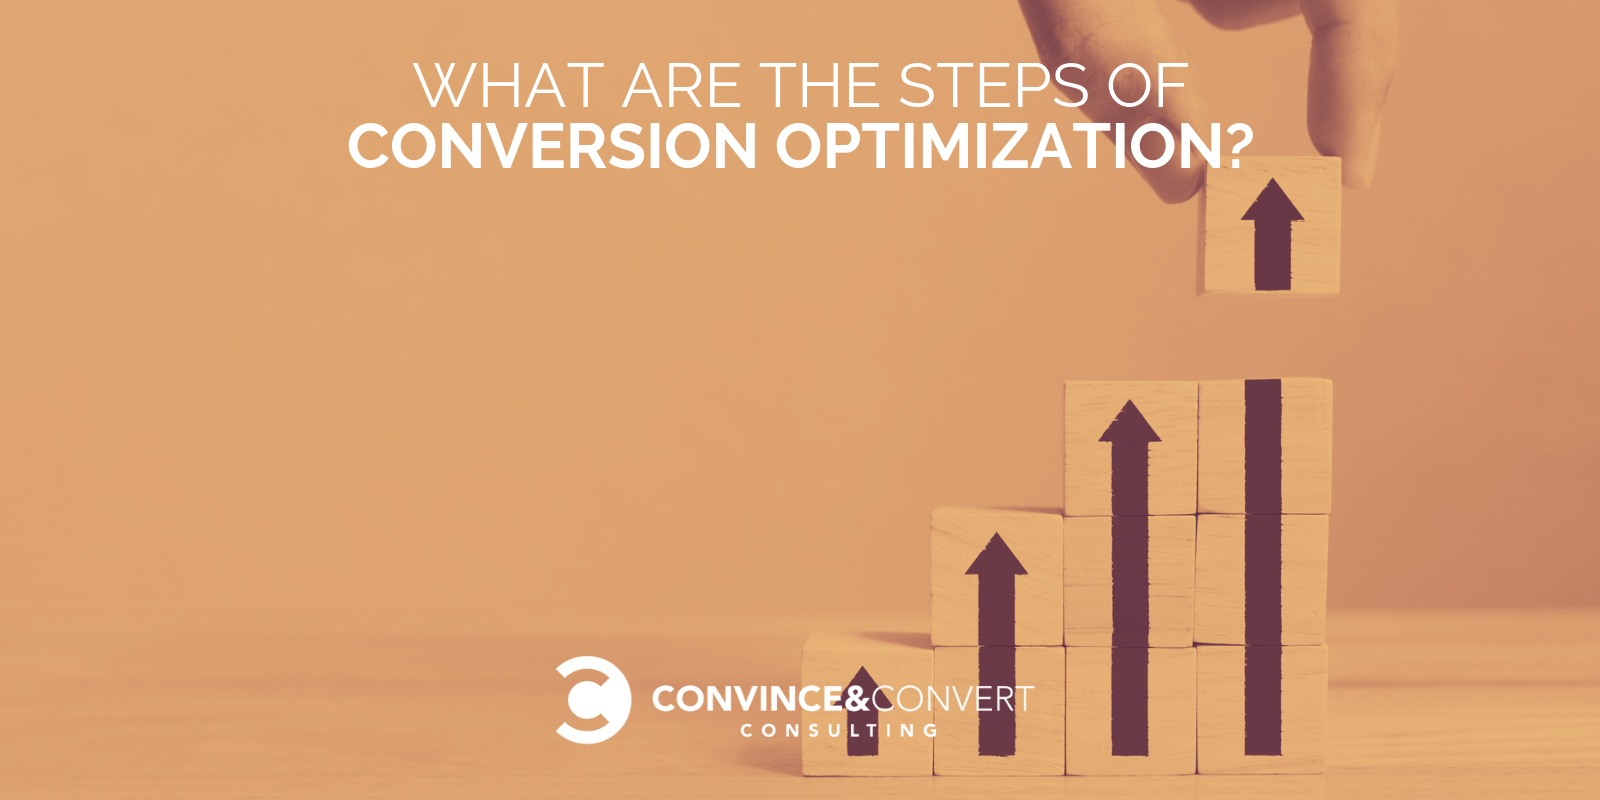 What are the steps of conversion optimization?